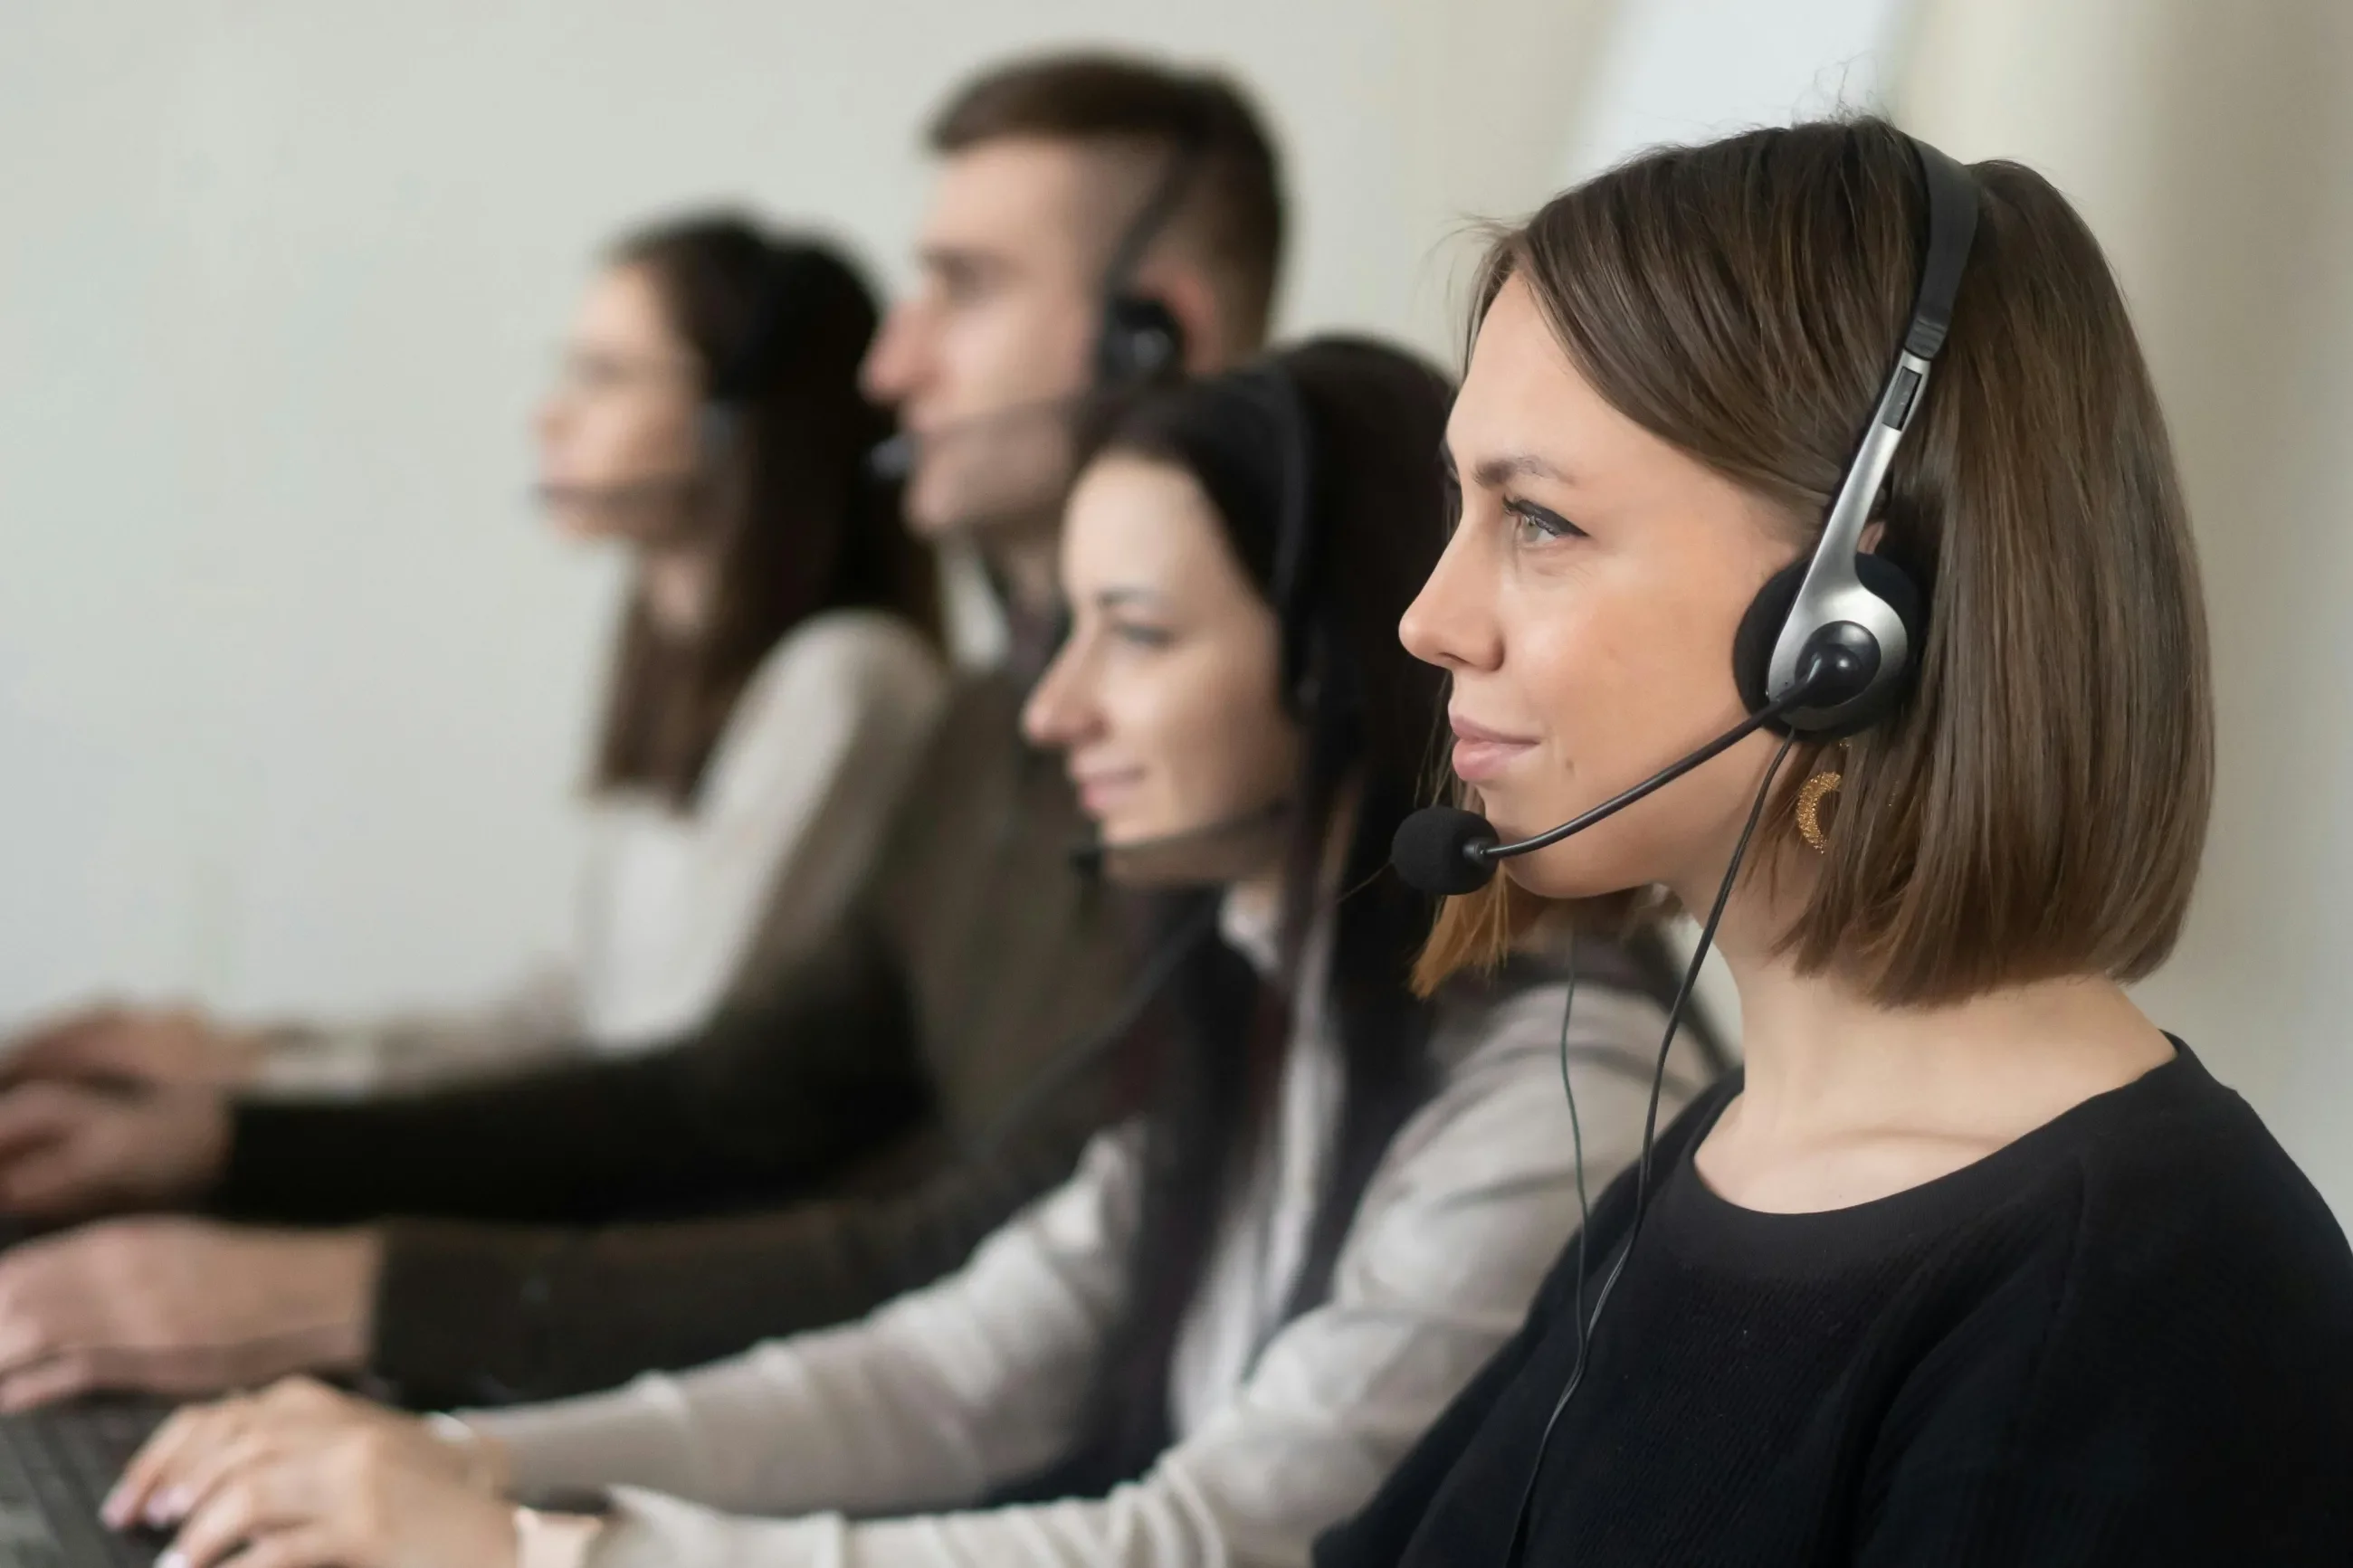 AI in Contact Centers